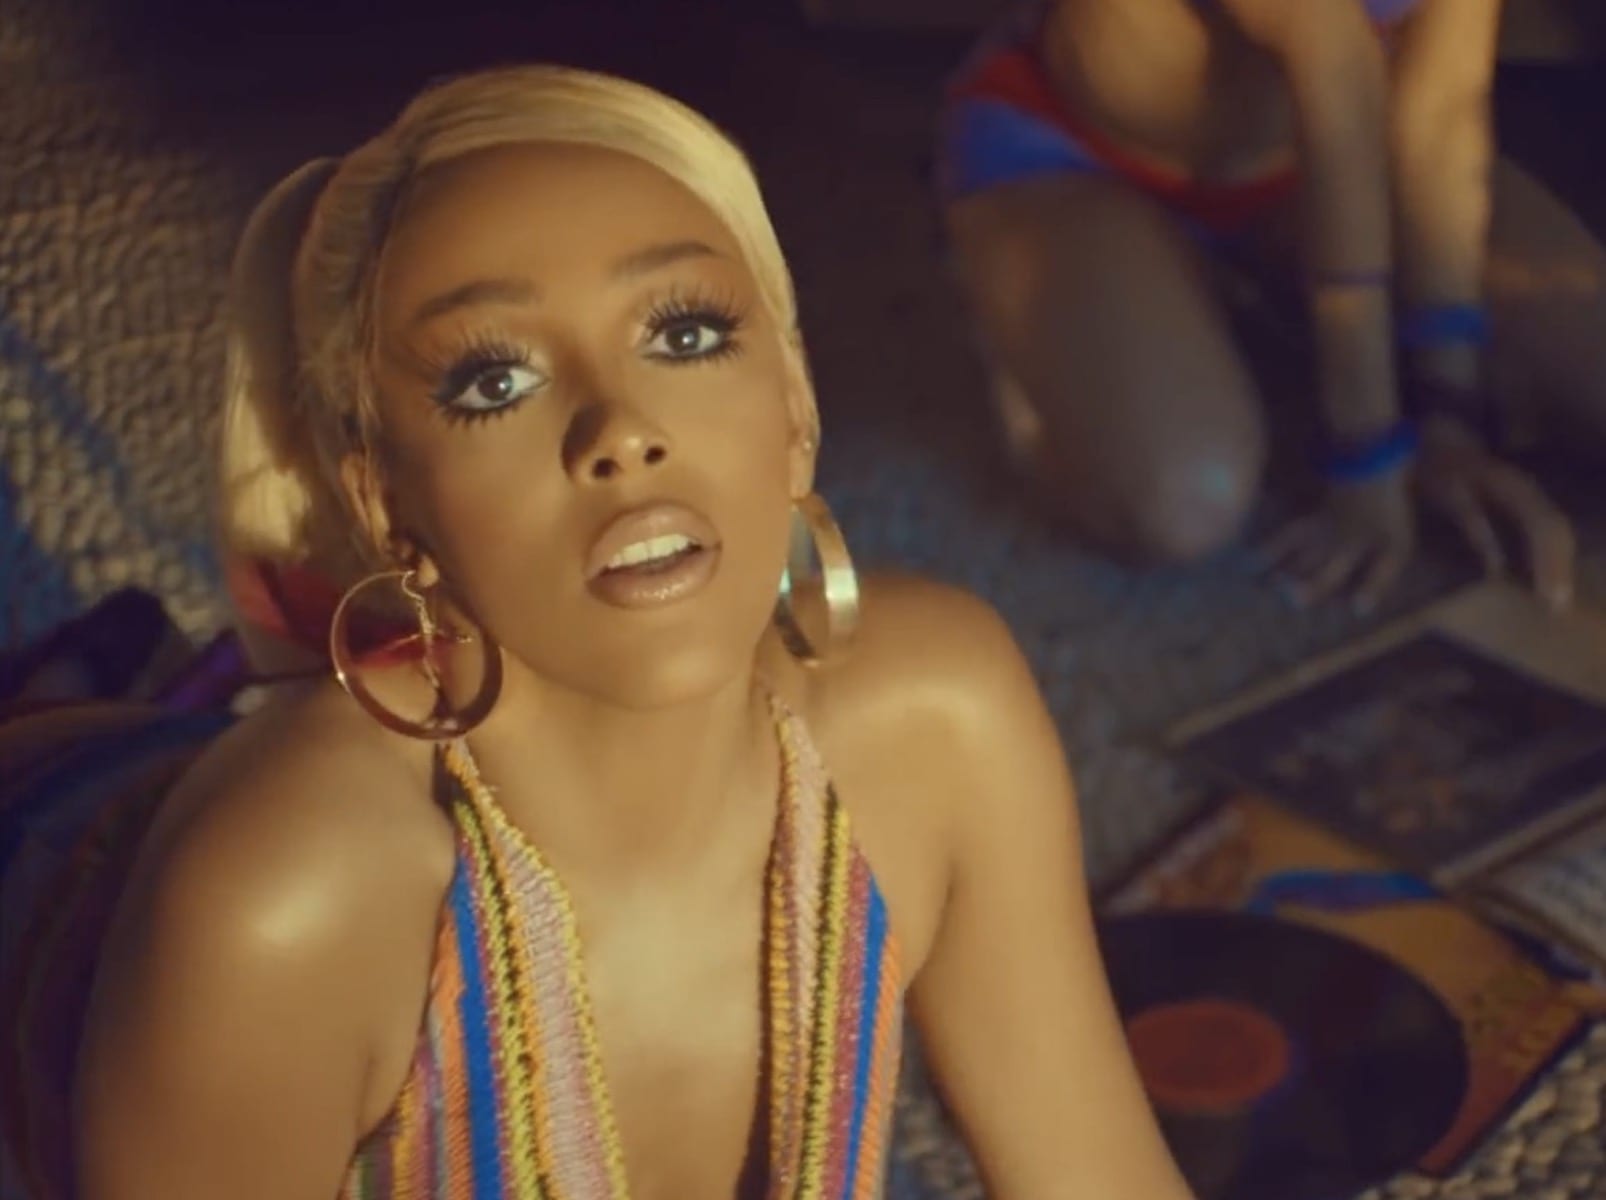 Watch: Doja Cat Shows Off Her Curve Game + Goes Retro Mode In New SAY SO Video